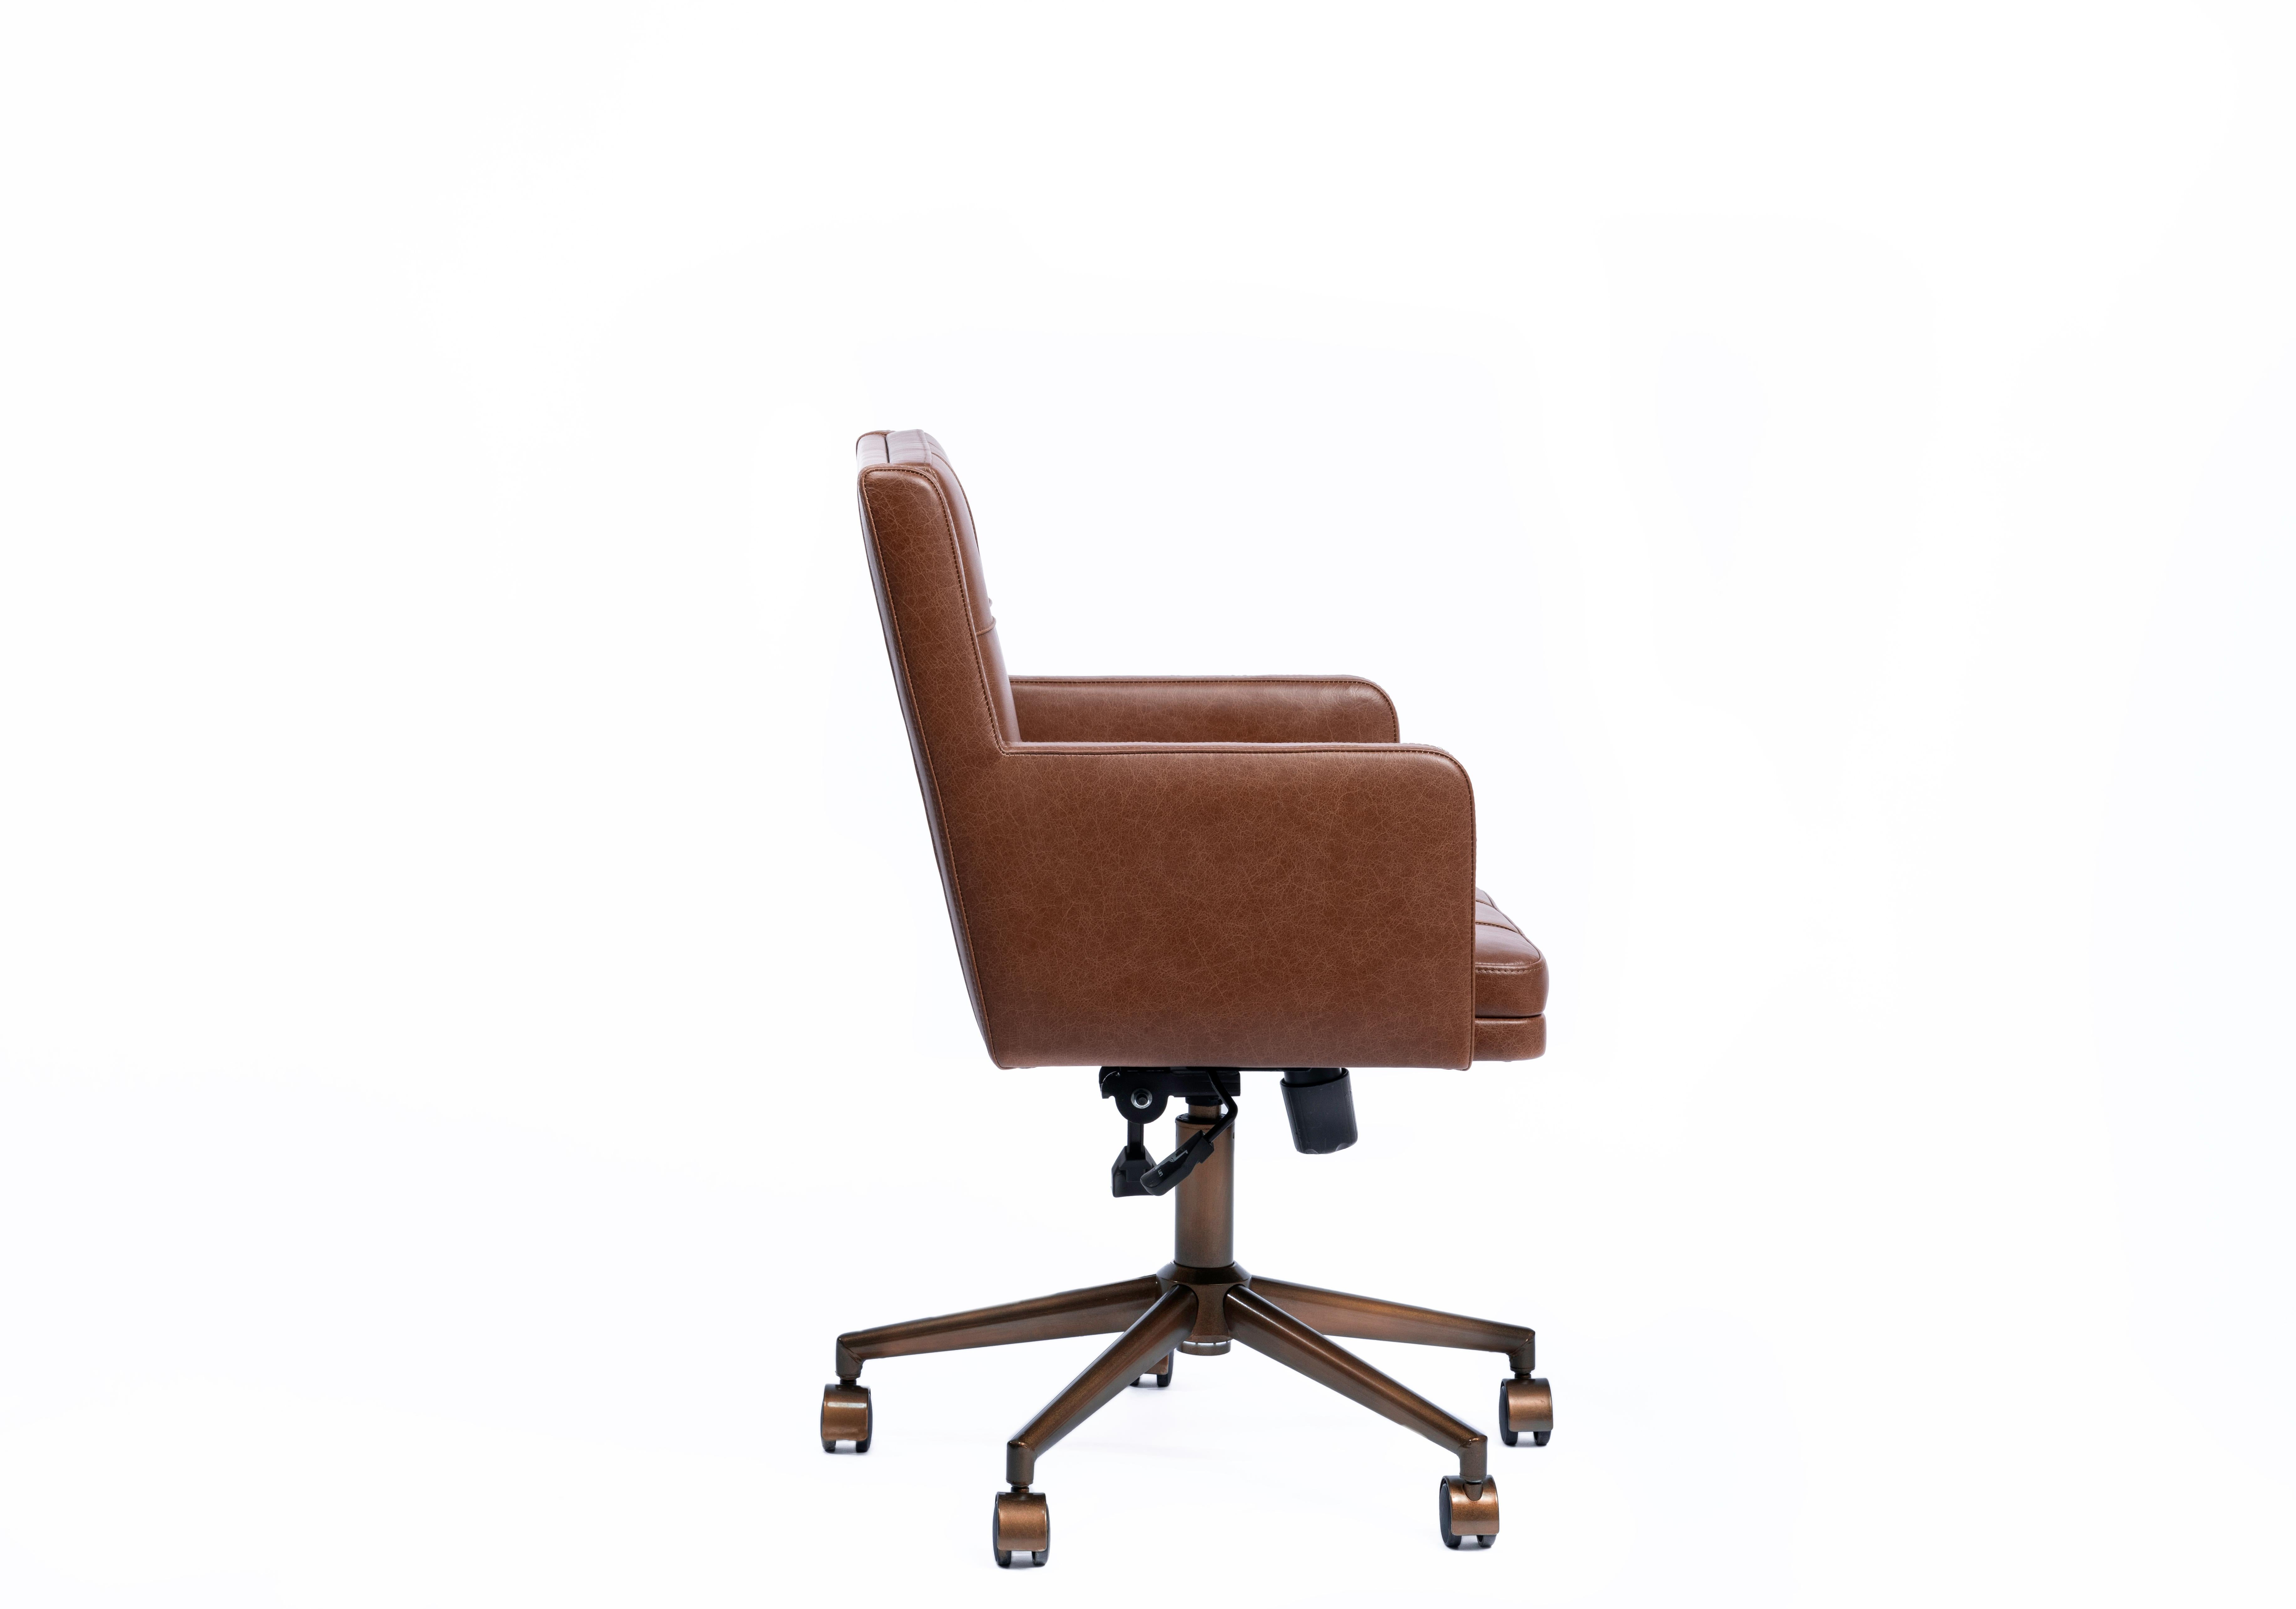 Turkish Office Chair, International Style Leather Office Chair For Sale